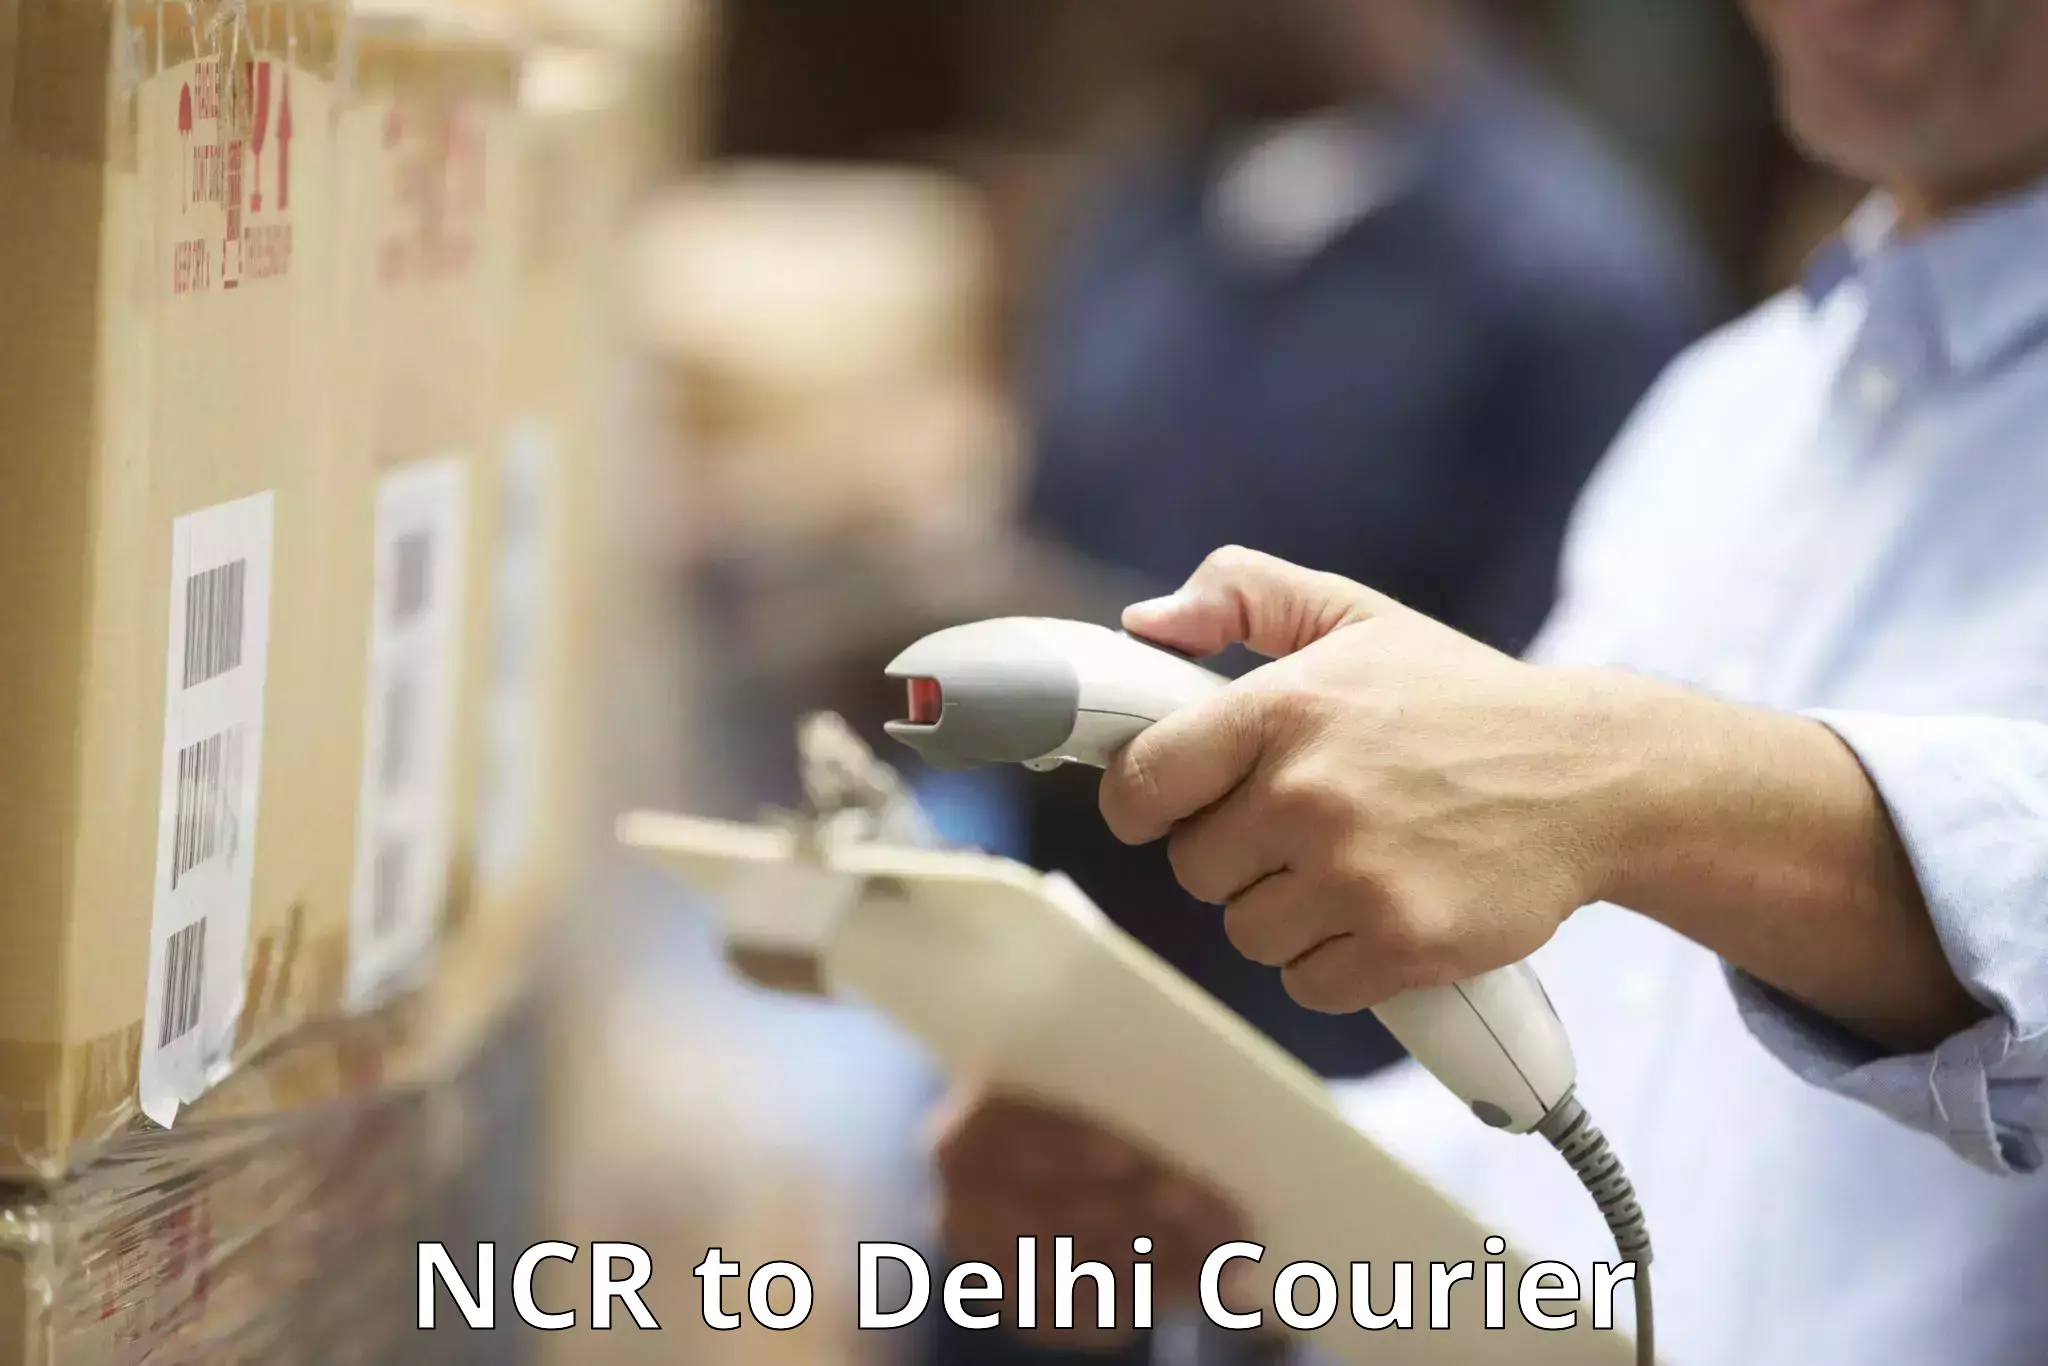 Door to door luggage delivery NCR to NCR